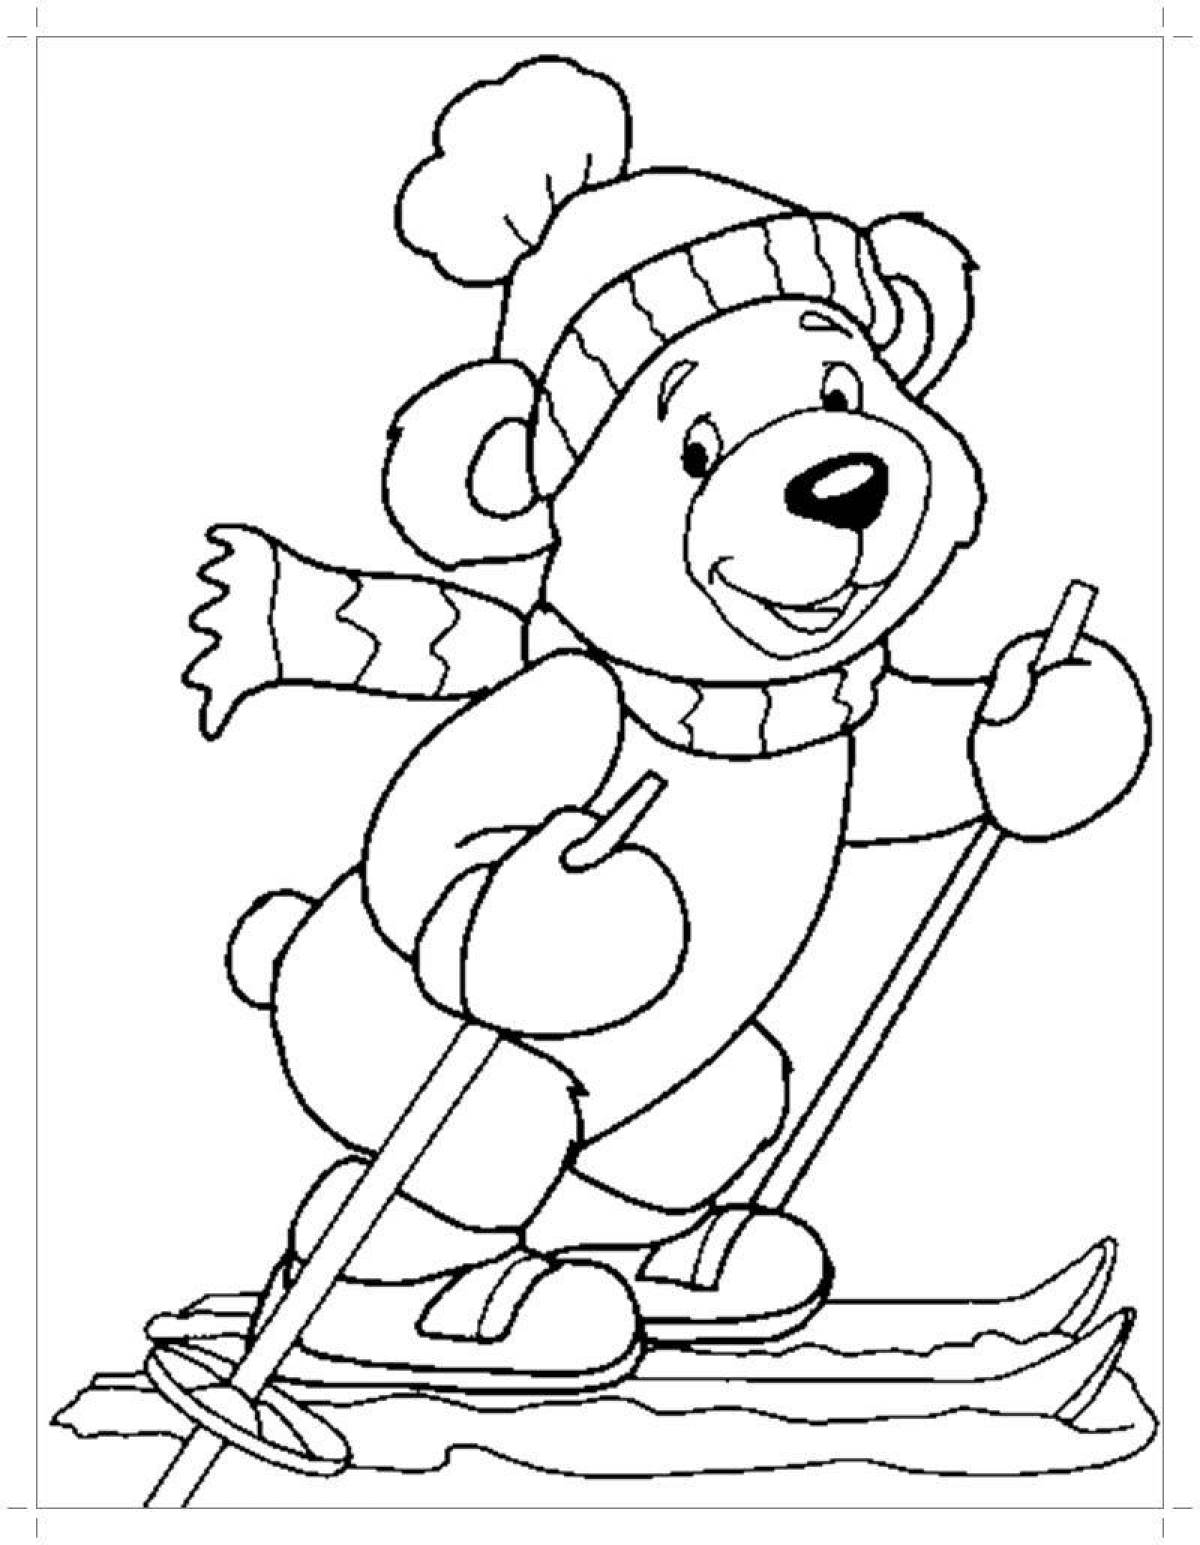 A fun winter coloring book for 2-3 year olds